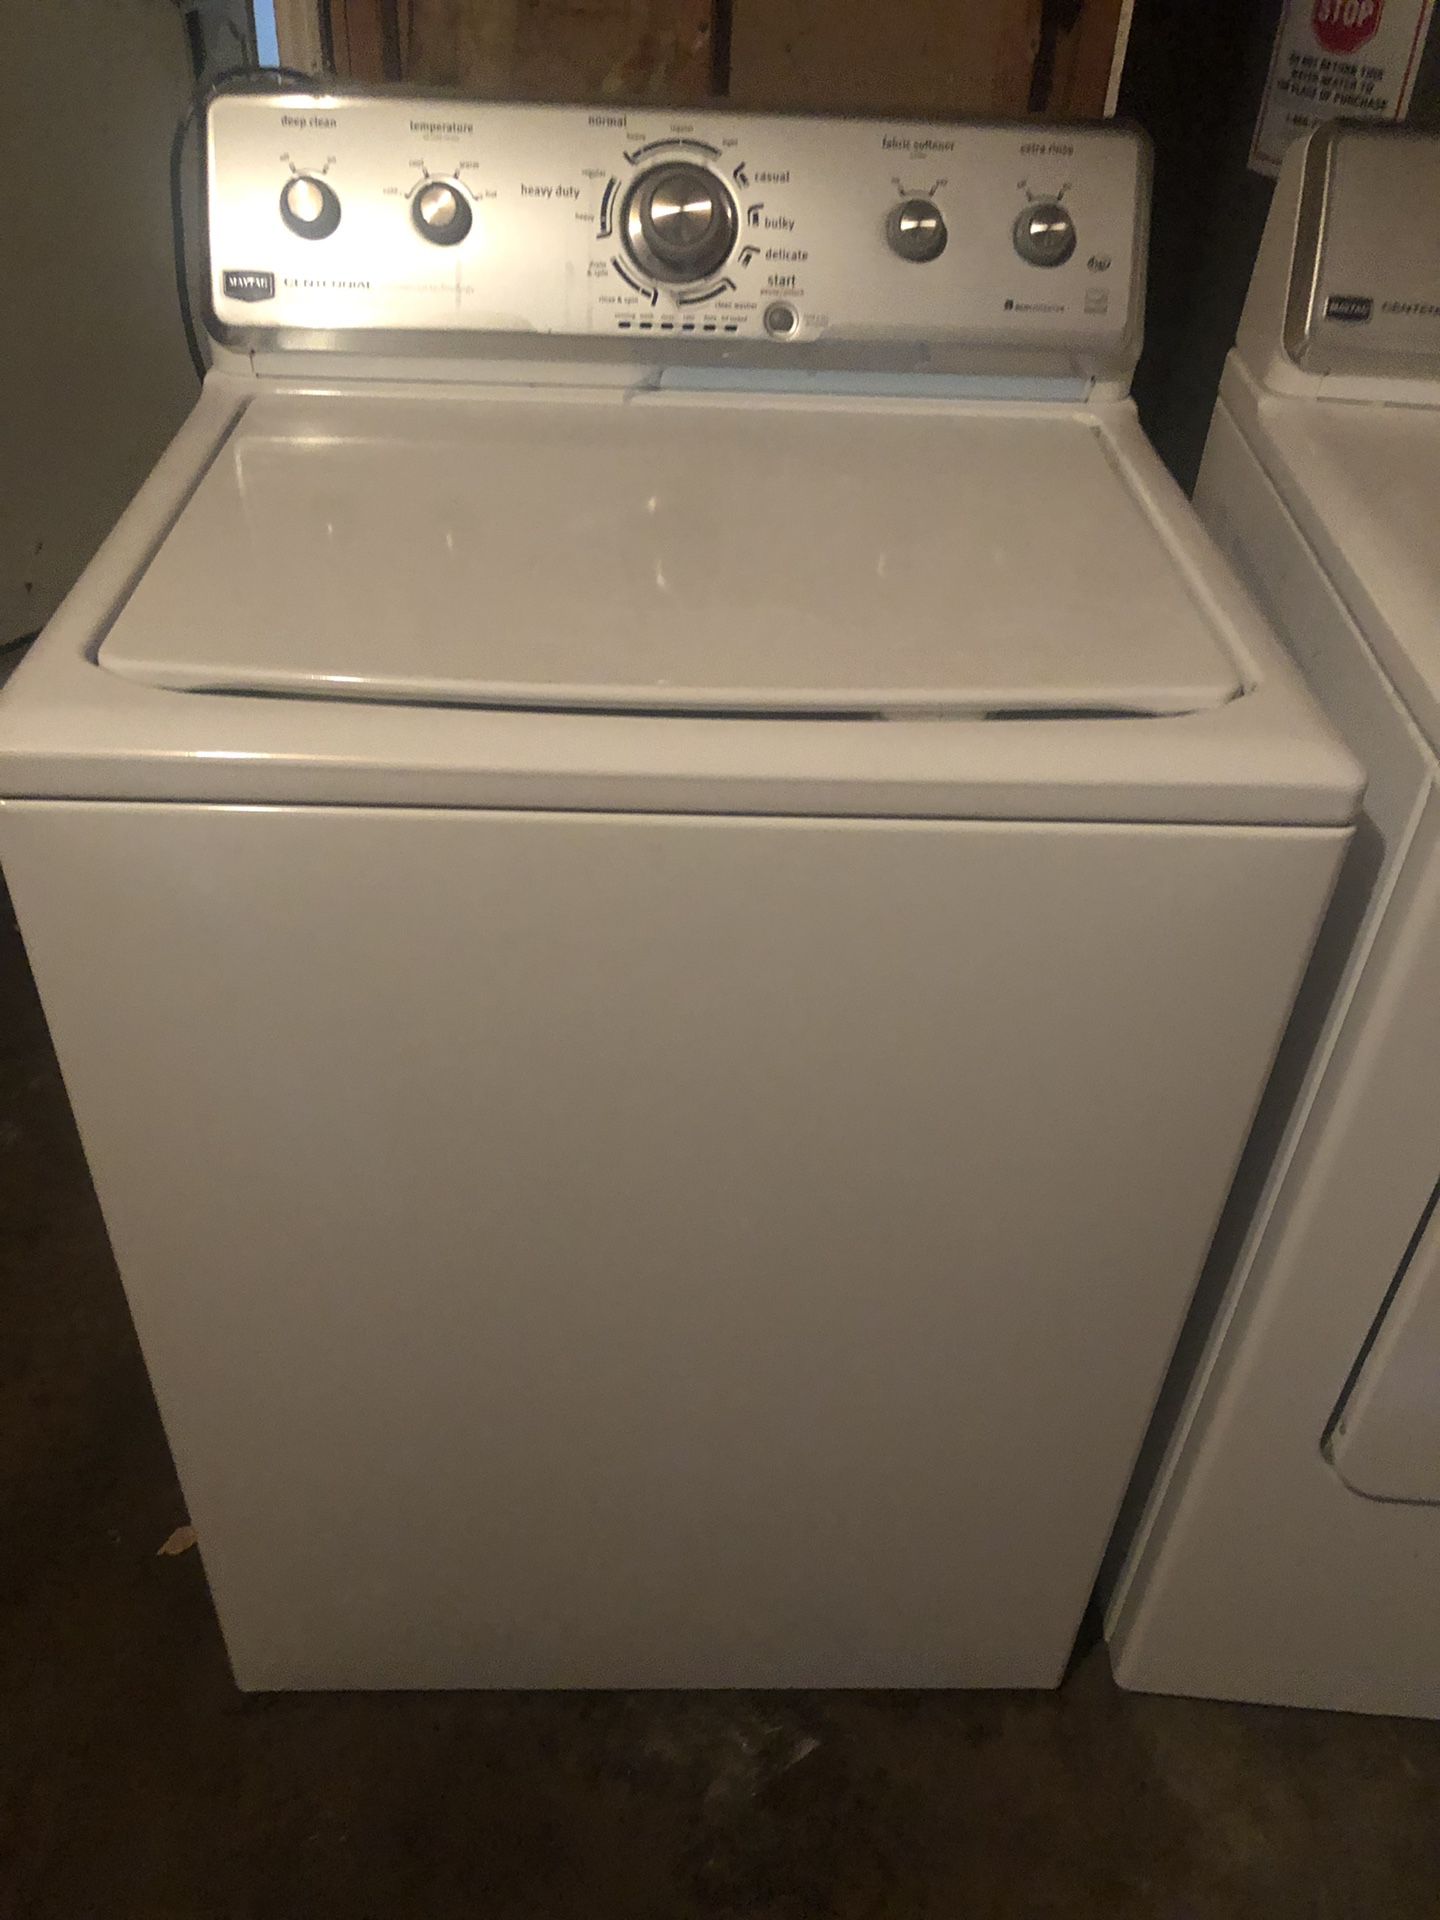 Maytag Centenial washer and dryer